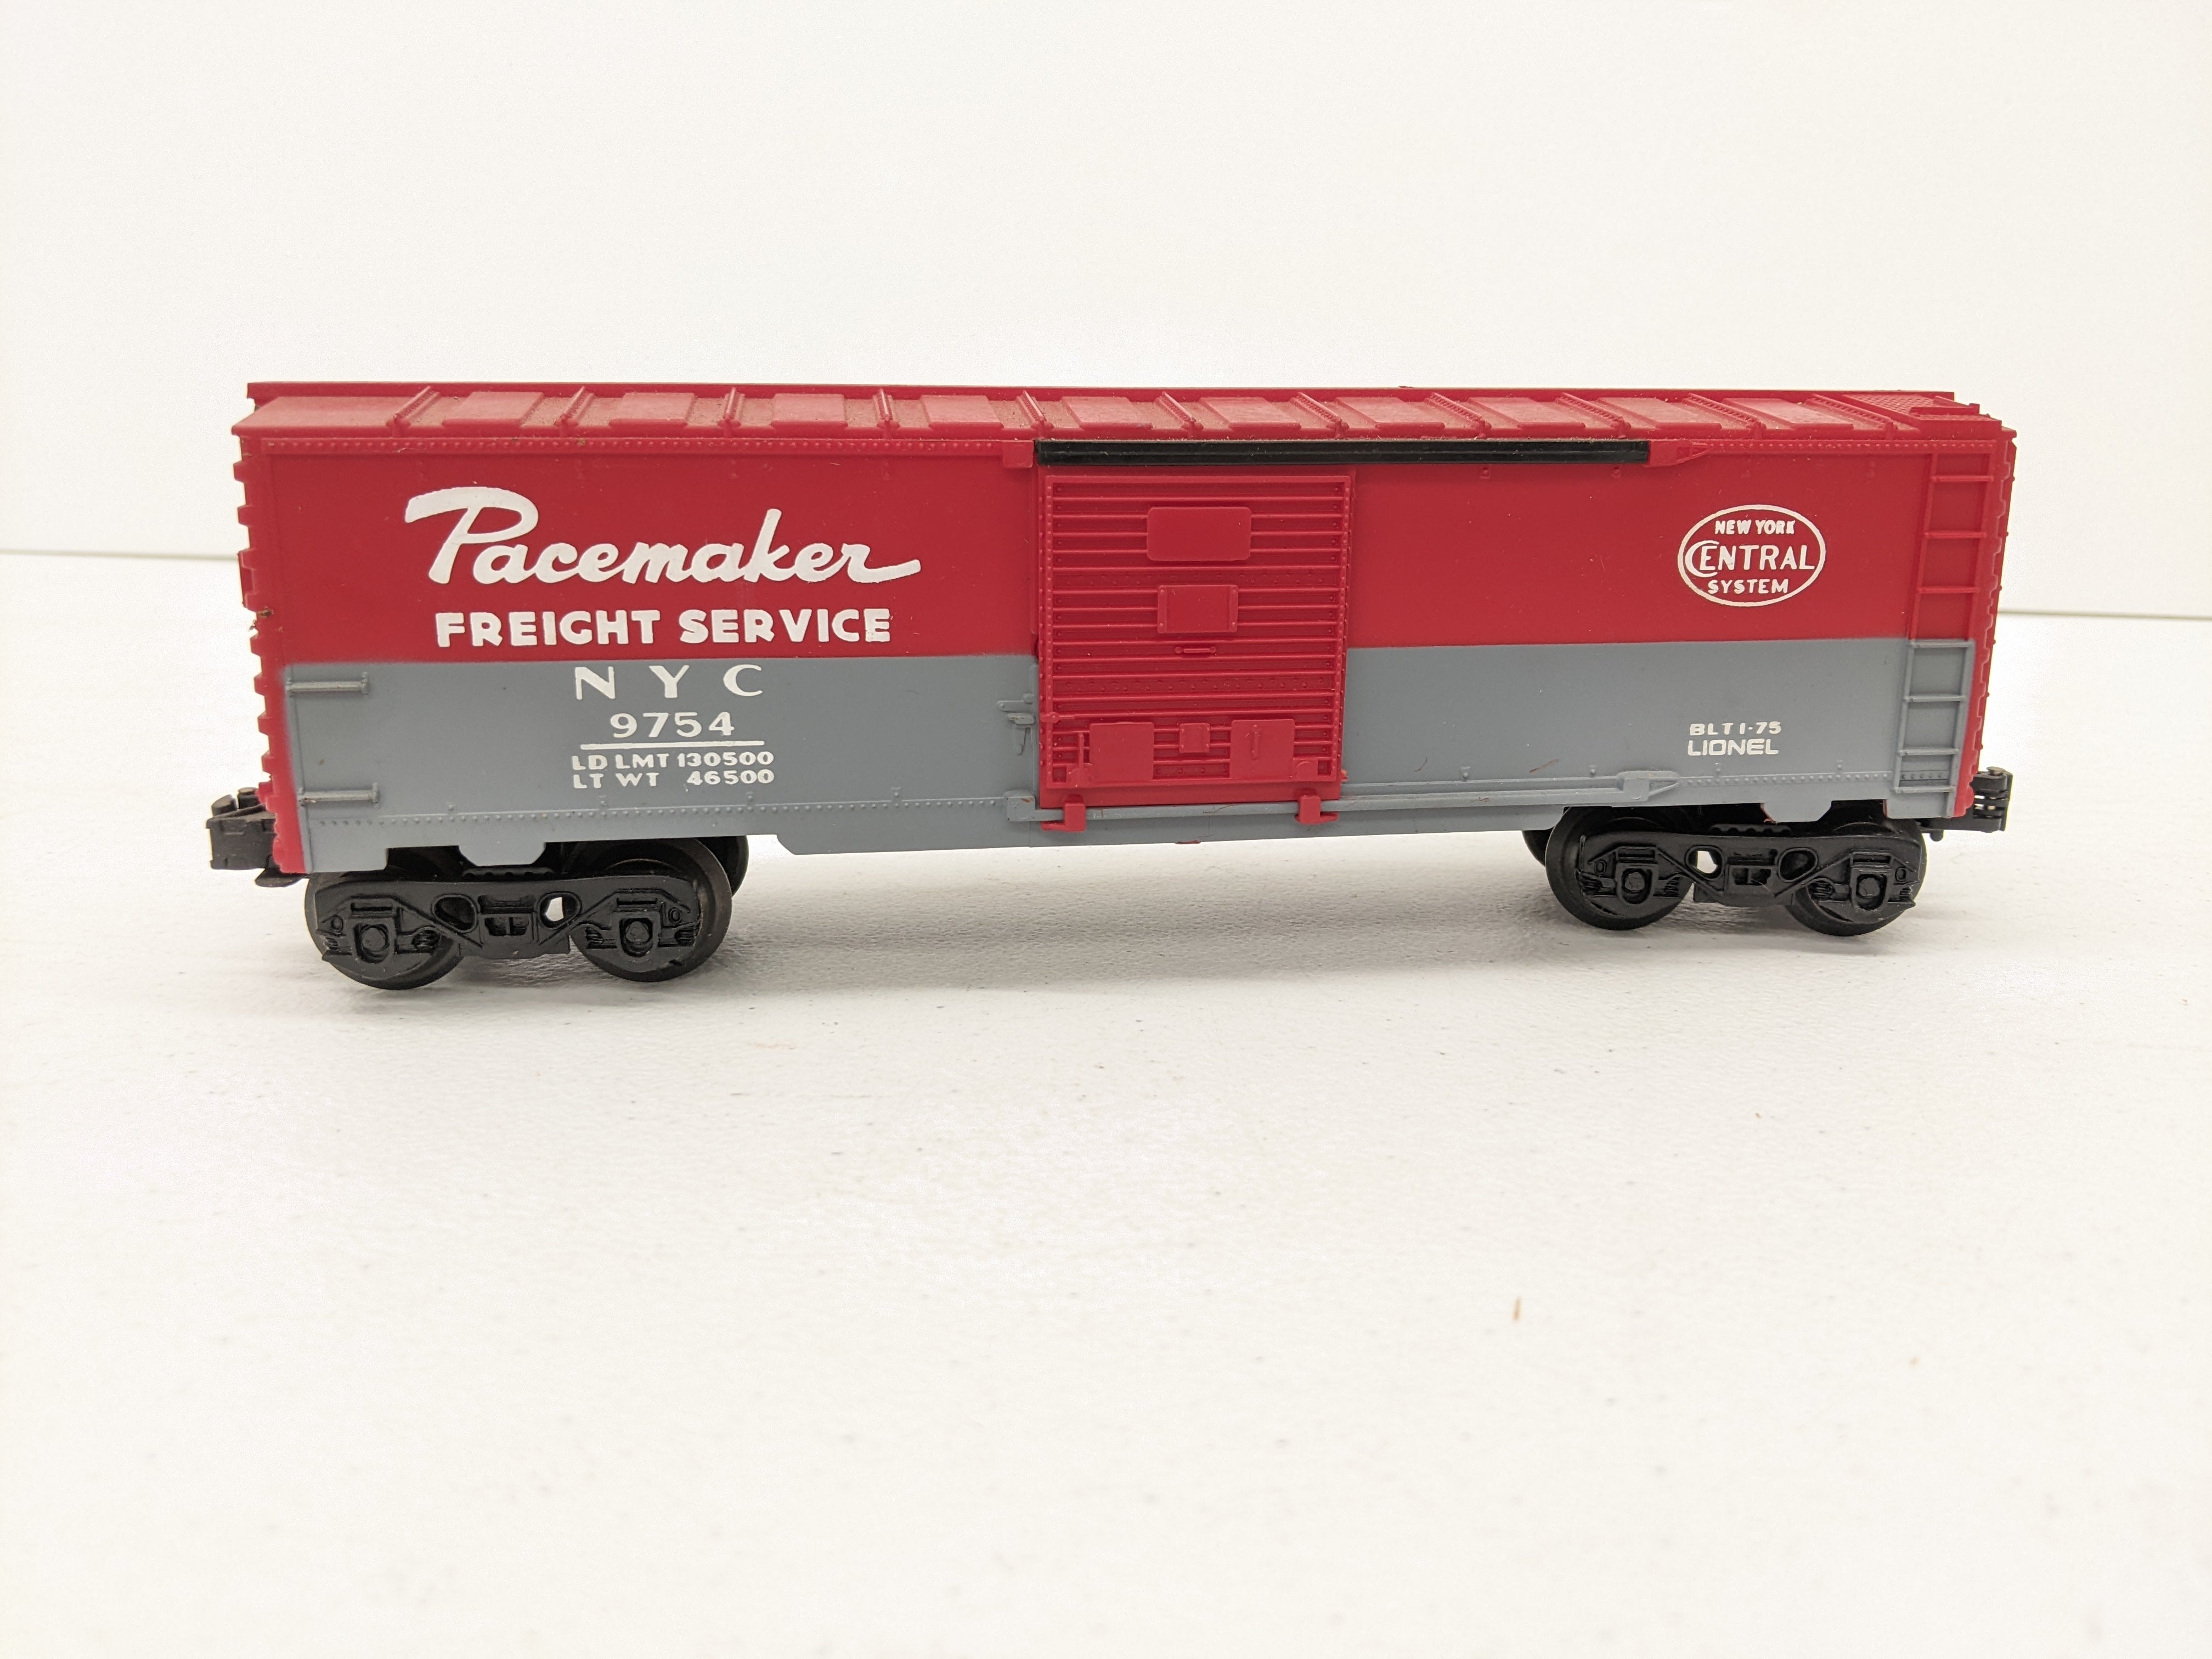 USED Lionel 2868768 O Scale, Box Car, Pacemaker, New York Central NYC #9754